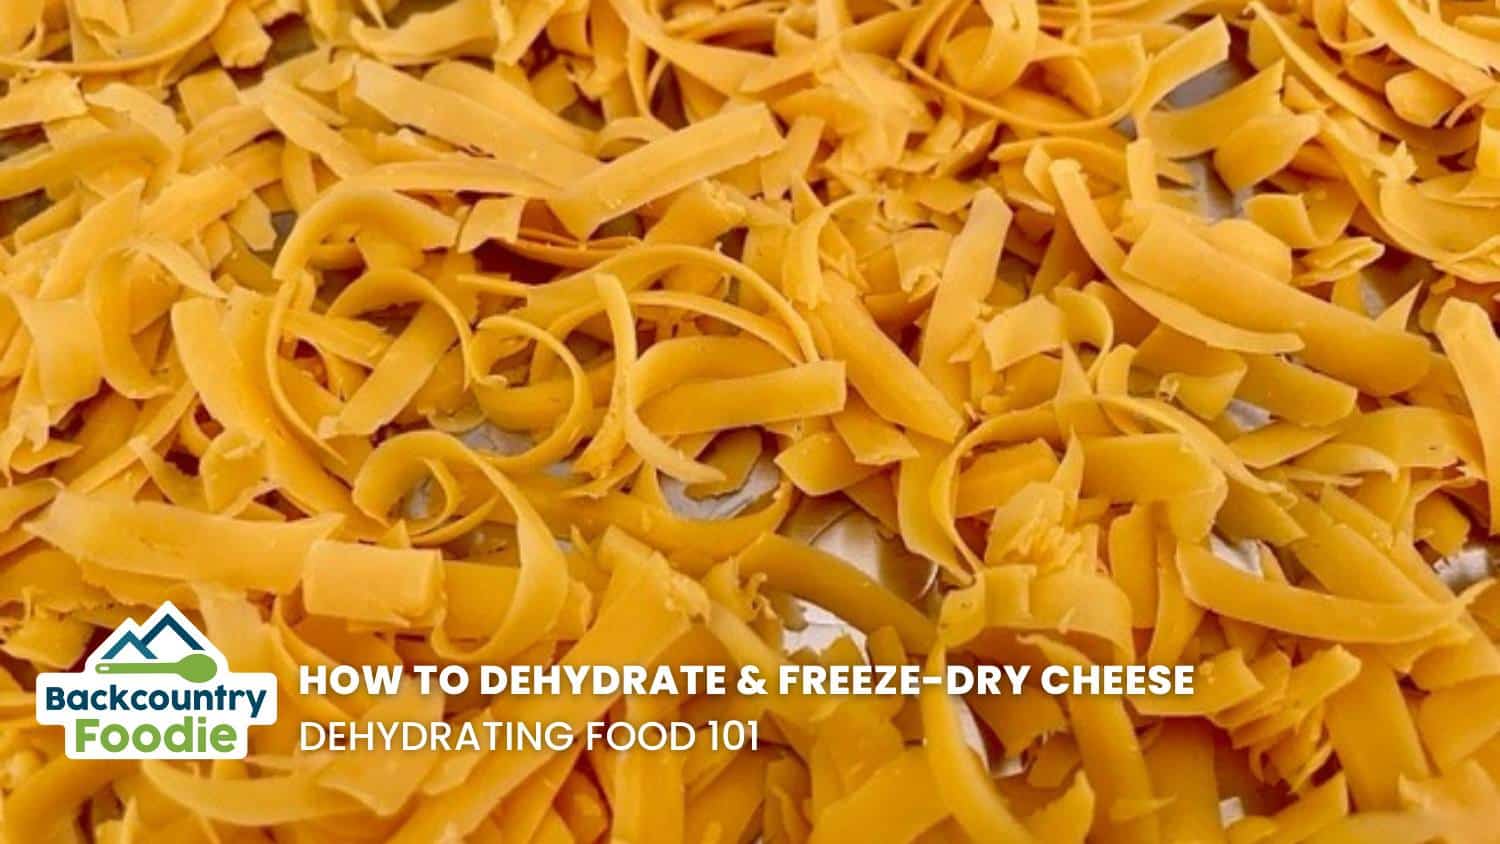 Backcountry Foodie How to dehydrate and freeze dry cheese for backpacking meals